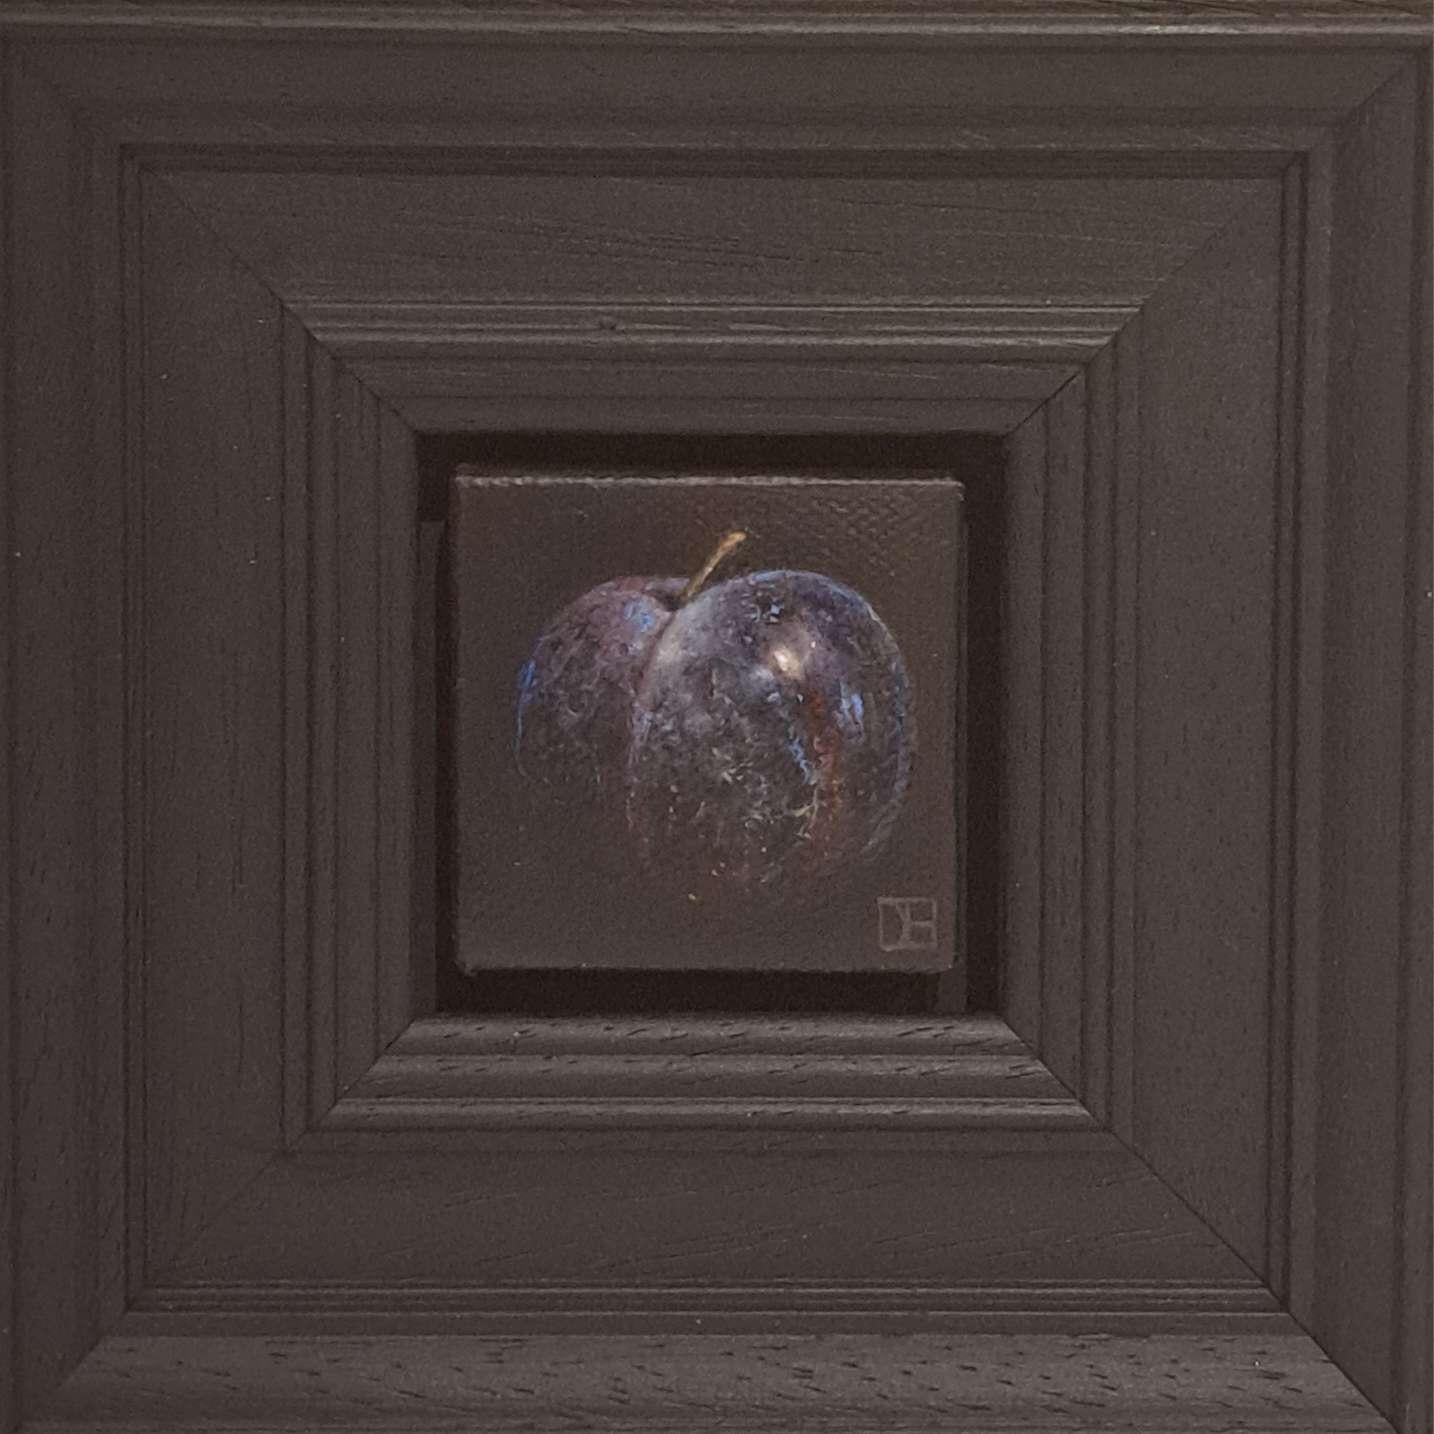 Pocket Juicy Plum [2023]

Pocket Juicy Plum is an original oil painting by Dani Humberstone as part of her Pocket Painting series featuring small scale realistic oil paintings, with a nod to baroque still life painting. The paintings are set in a